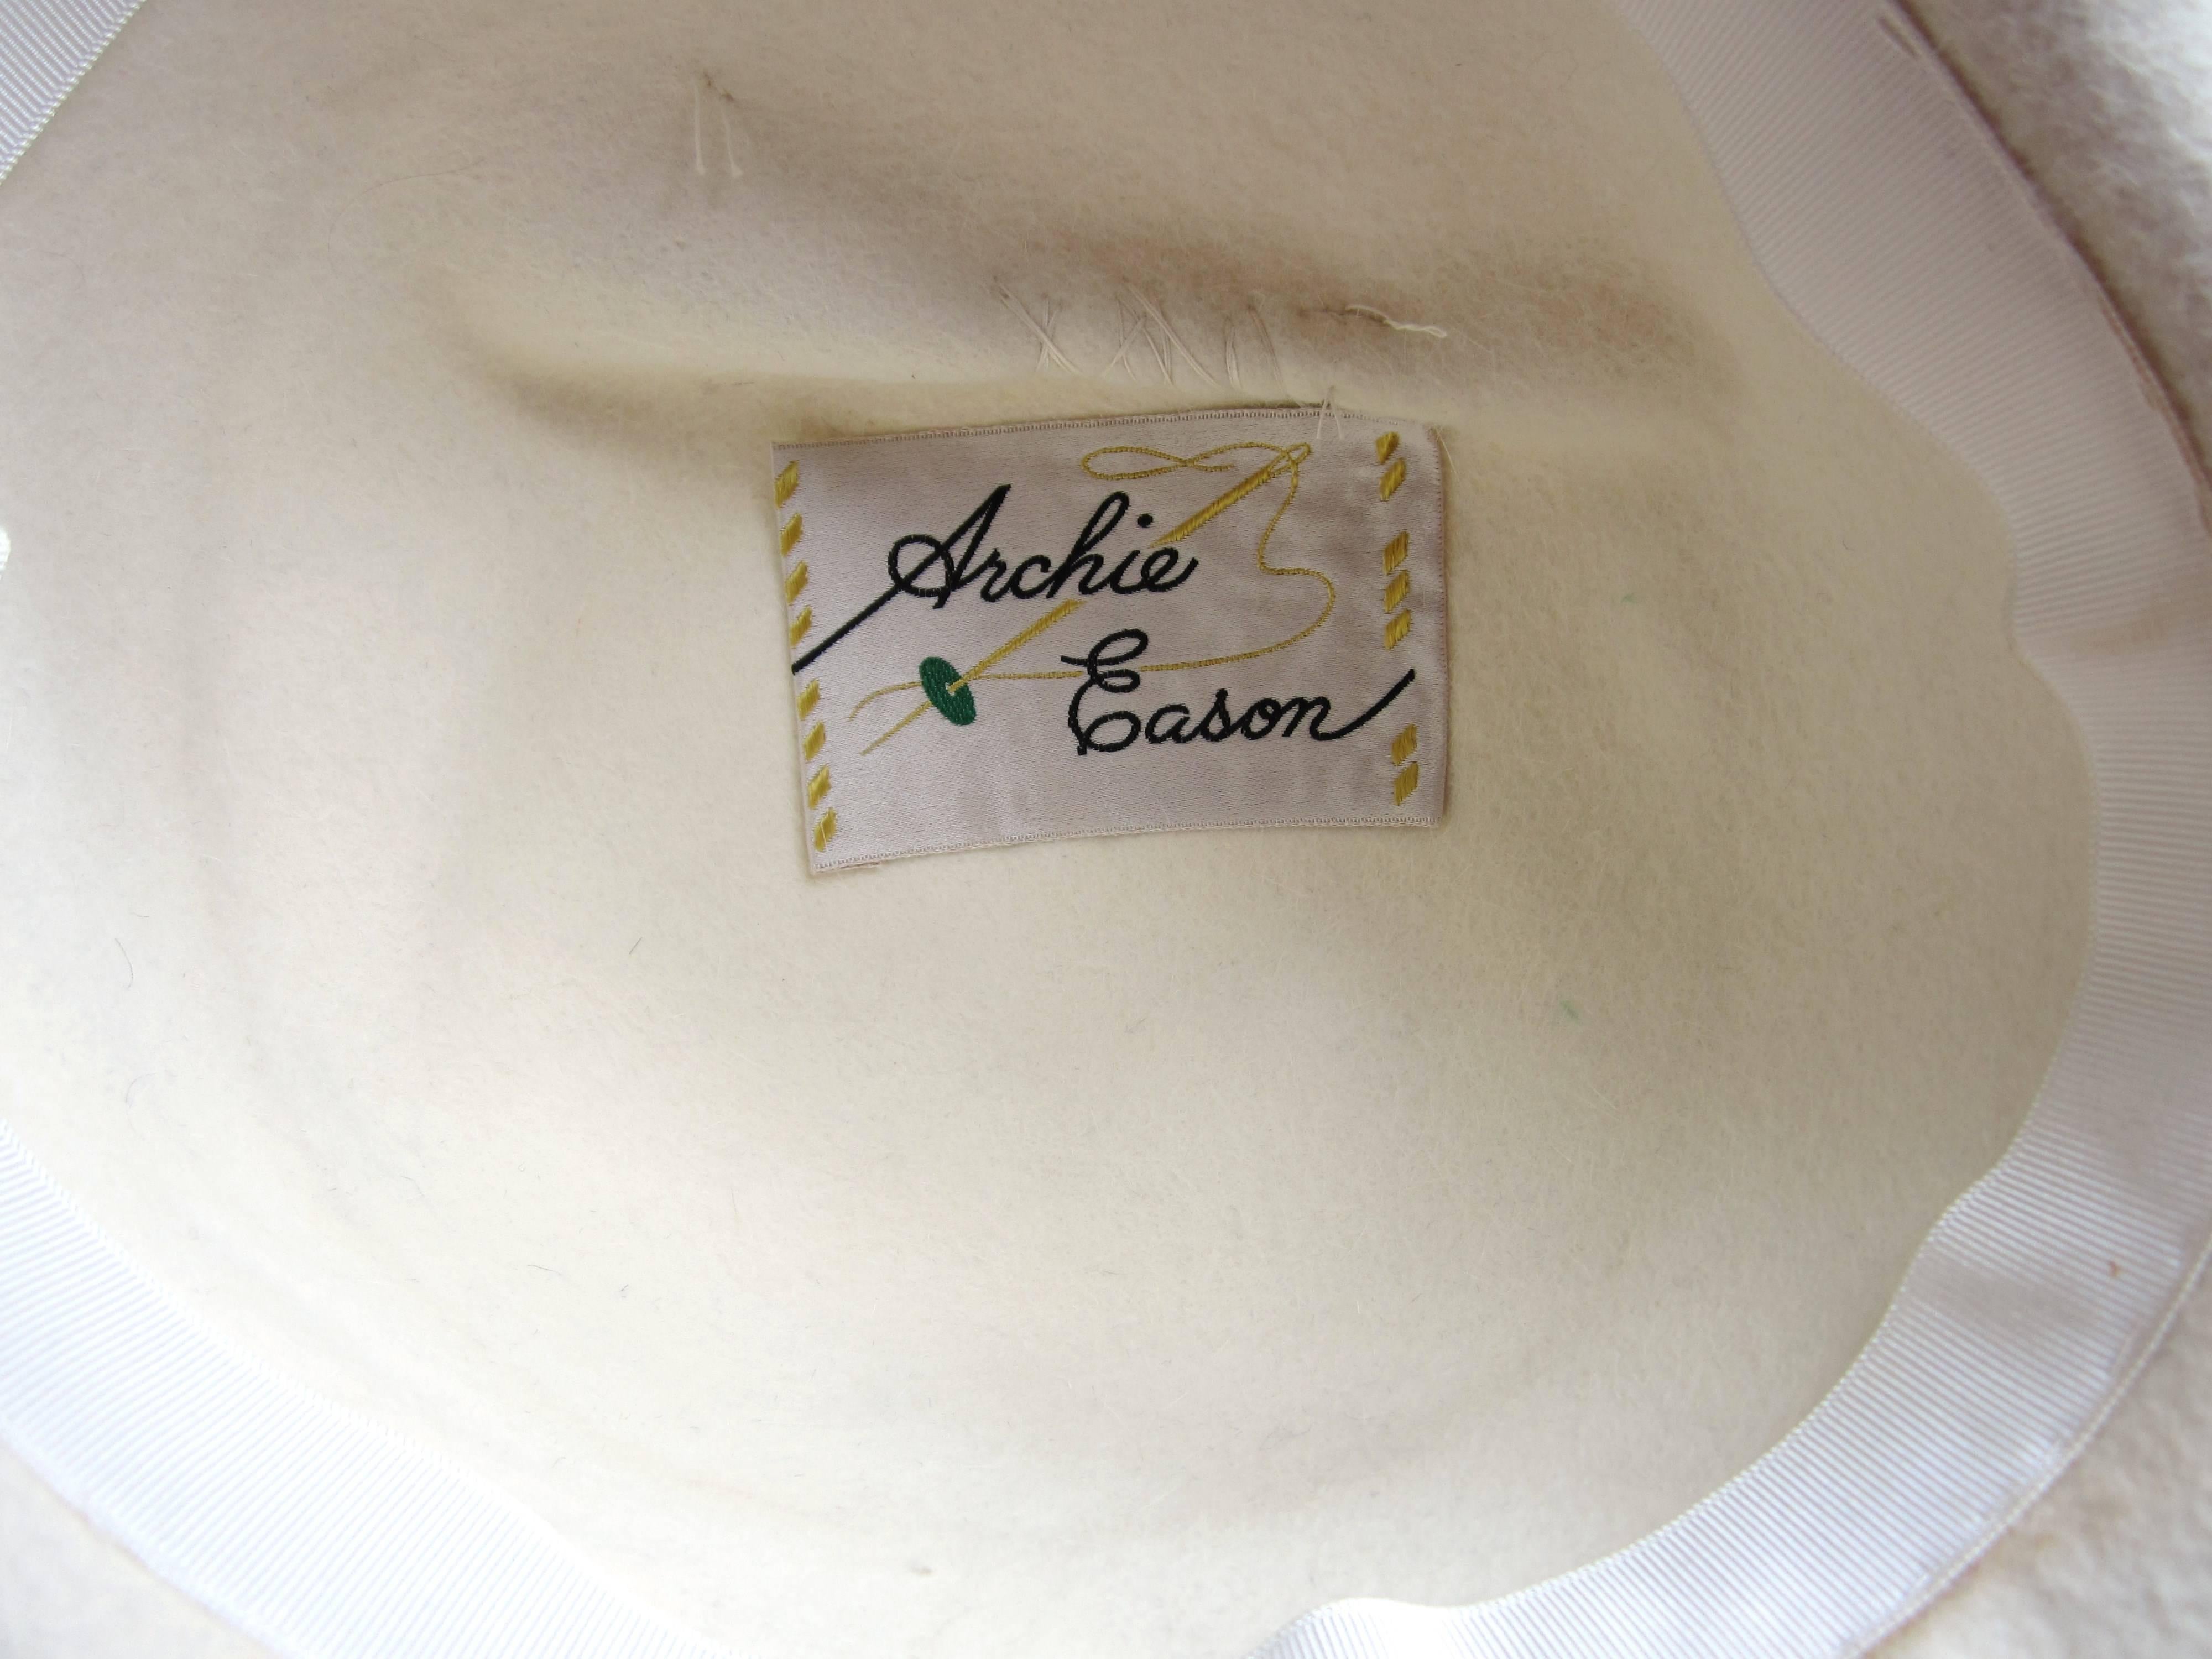  1960s Archie Eason Cream Feathered Oversized Fedora Hat - Vintage  In Good Condition For Sale In Wallkill, NY